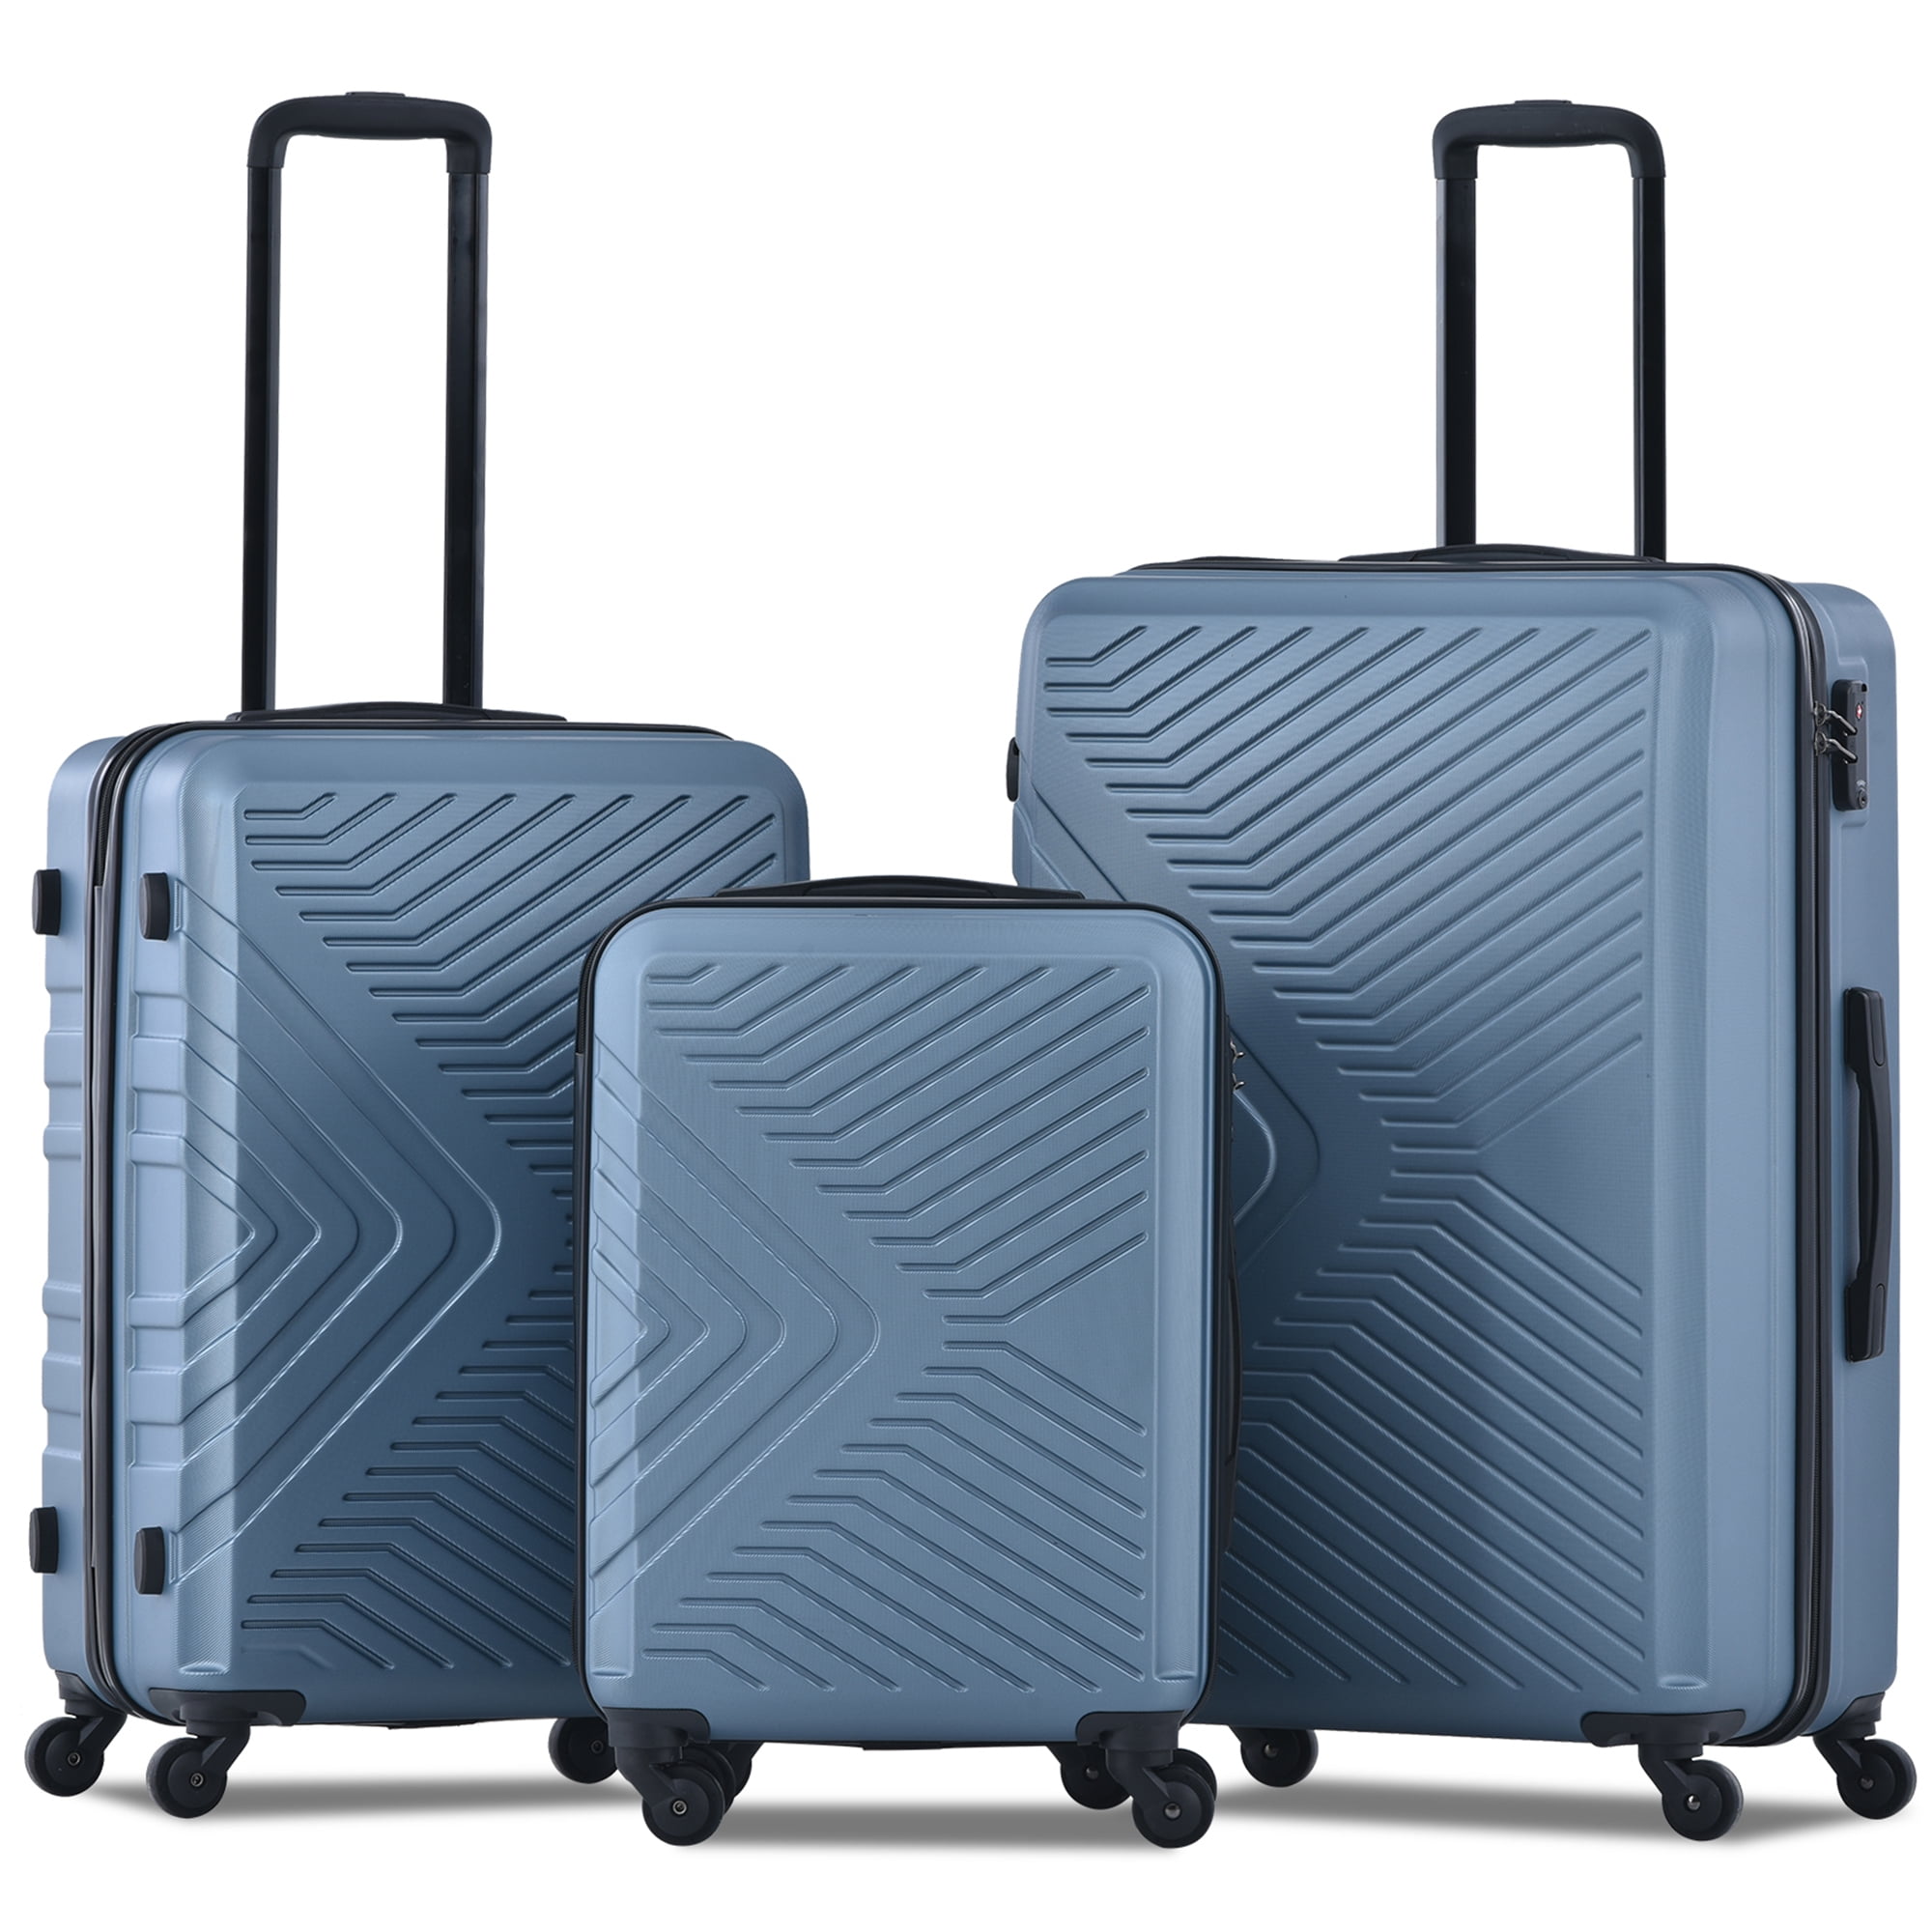 Travelhouse 3 Piece Luggage Set Hardshell Lightweight Suitcase with TSA Lock Spinner Wheels 20in24in28in.(Blue)